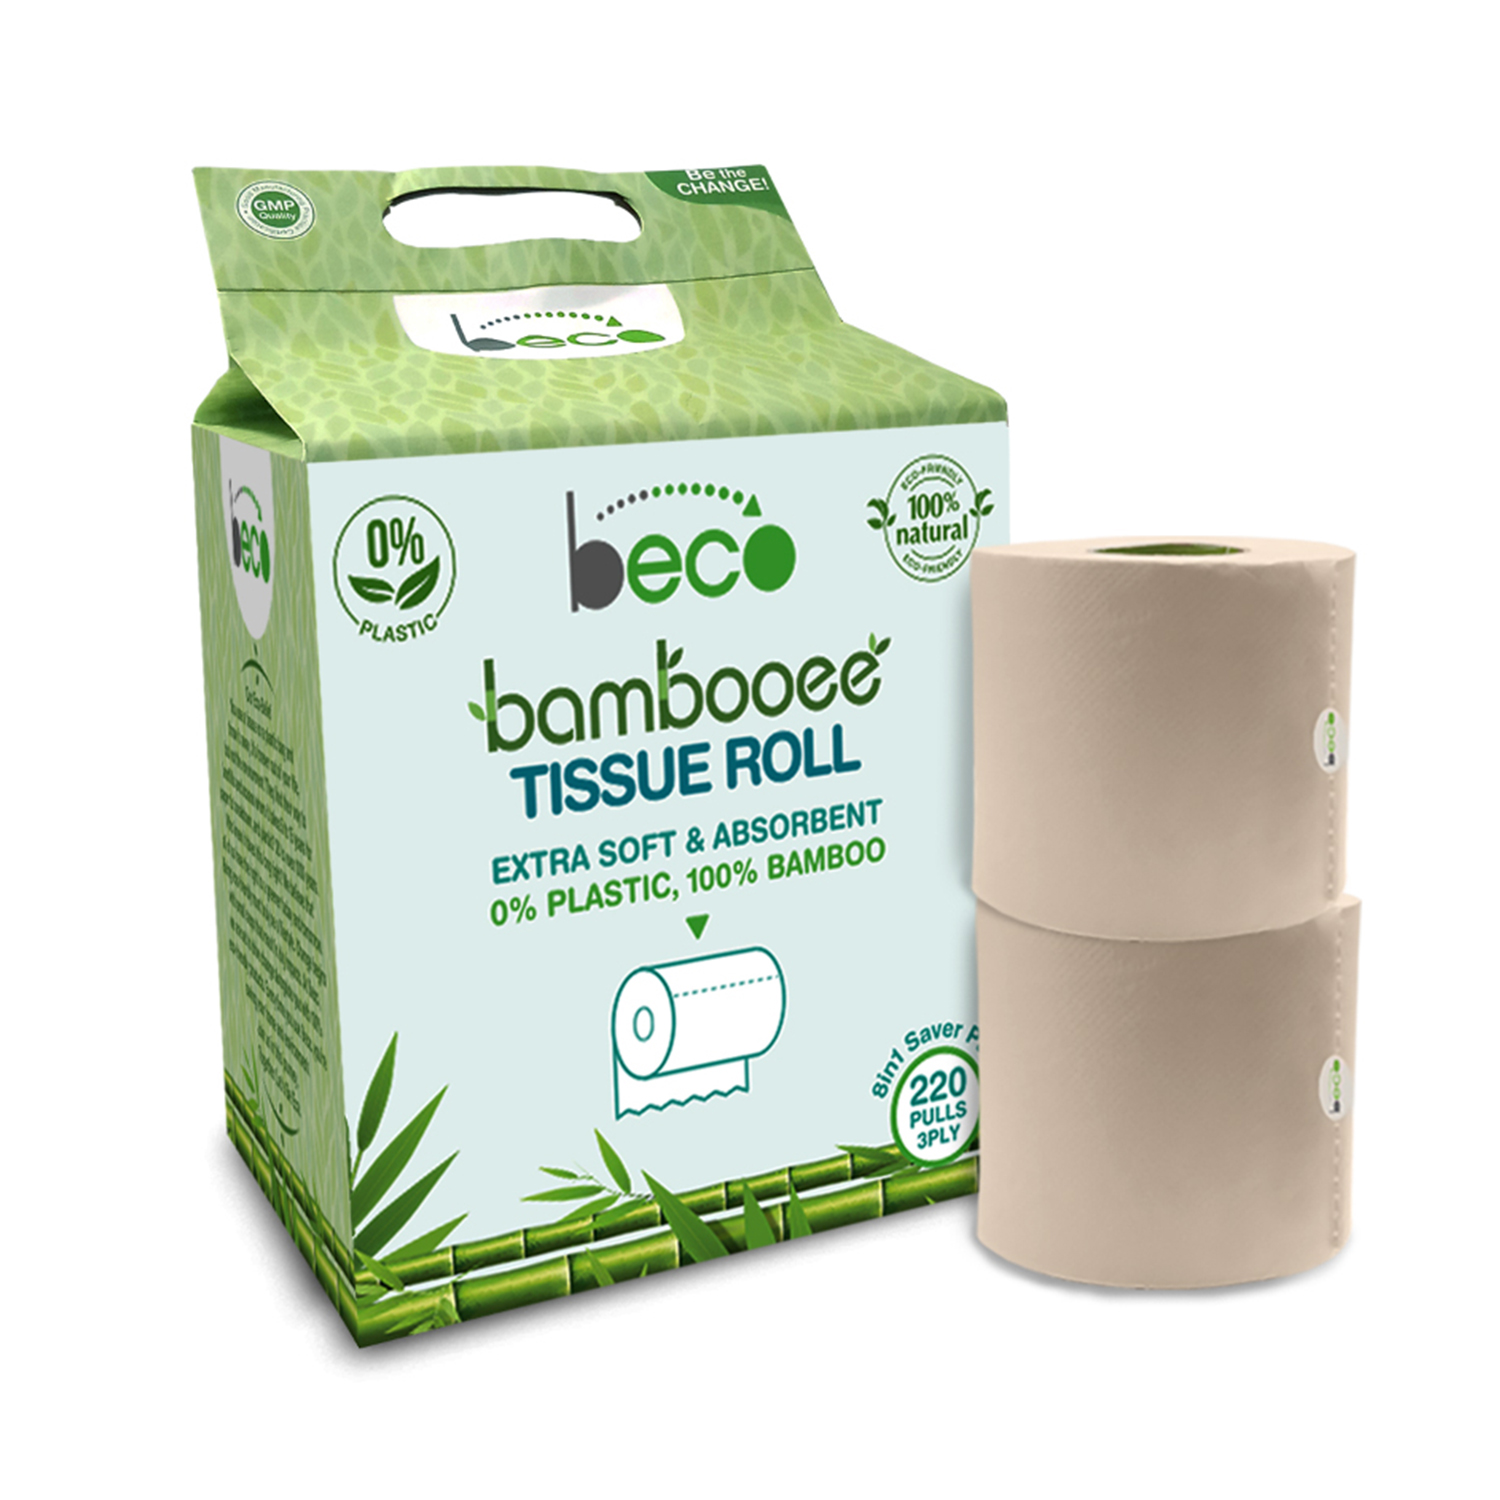 Beco bamboo tissue roll